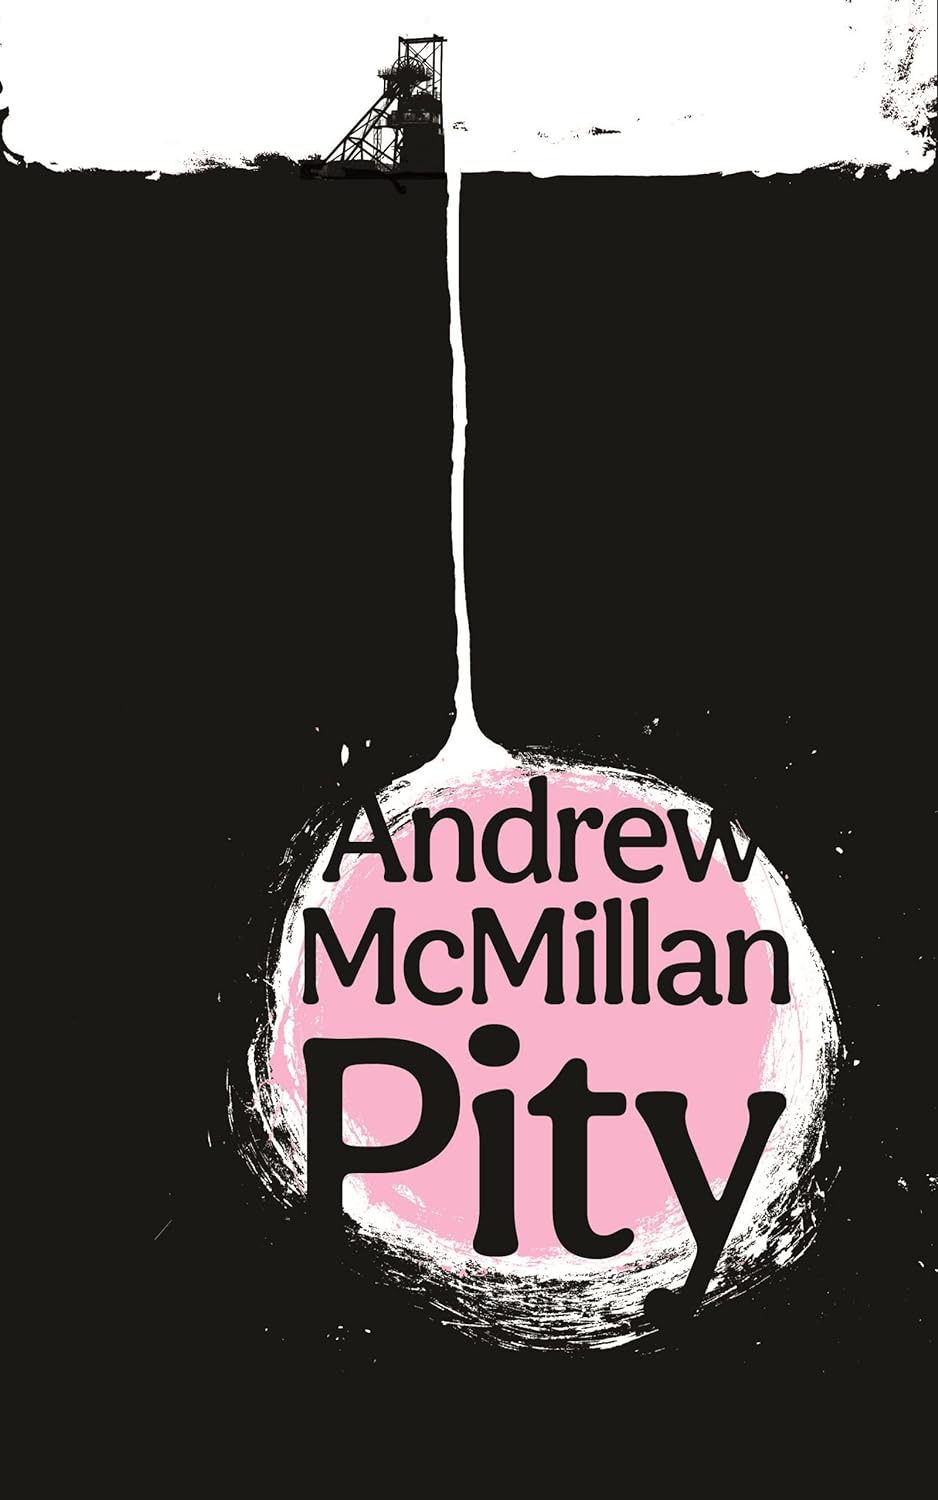 The book cover for Pity has a small black mine at the top of the cover with a white line leading down the black cover to a pink pit with the title and author name written inside.